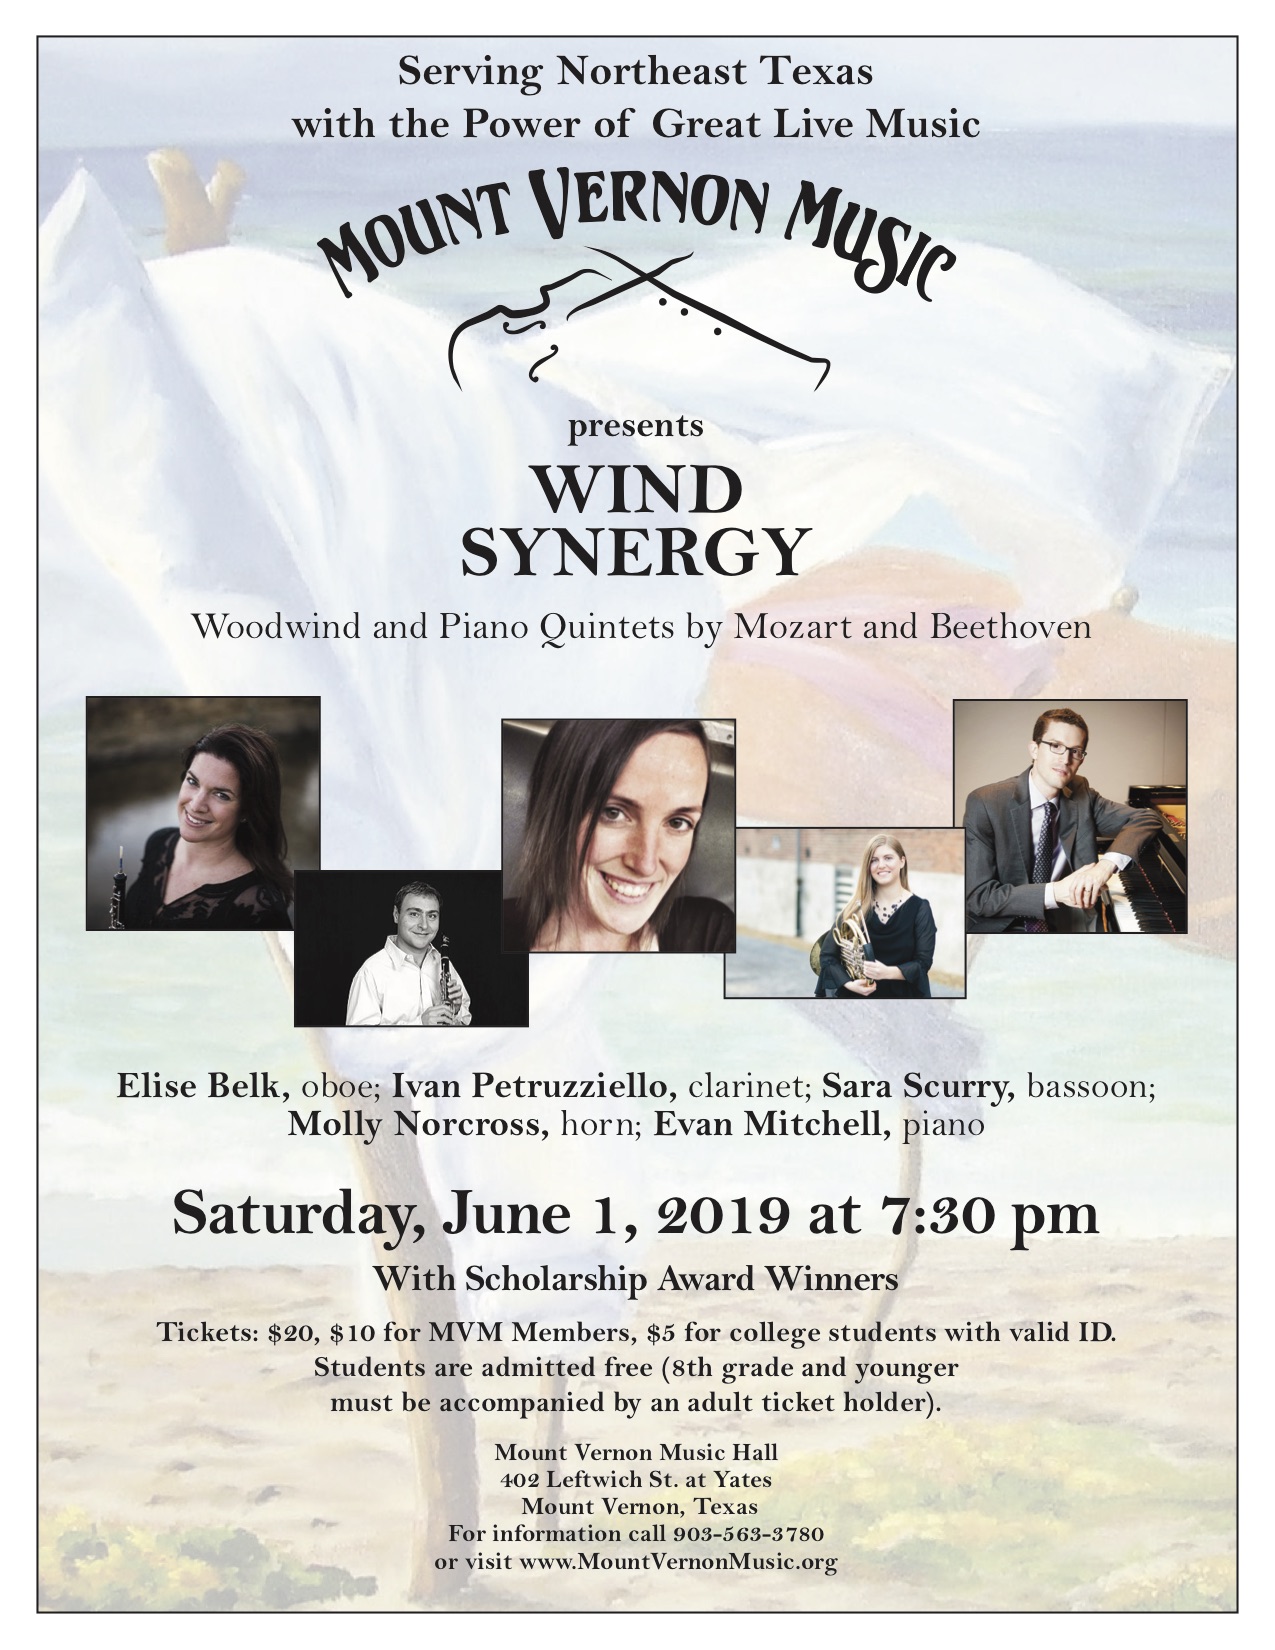 Mount Vernon Music Presents Wind Synergy,”a concert of music for wind instruments and piano” on Saturday, June 1, 2019